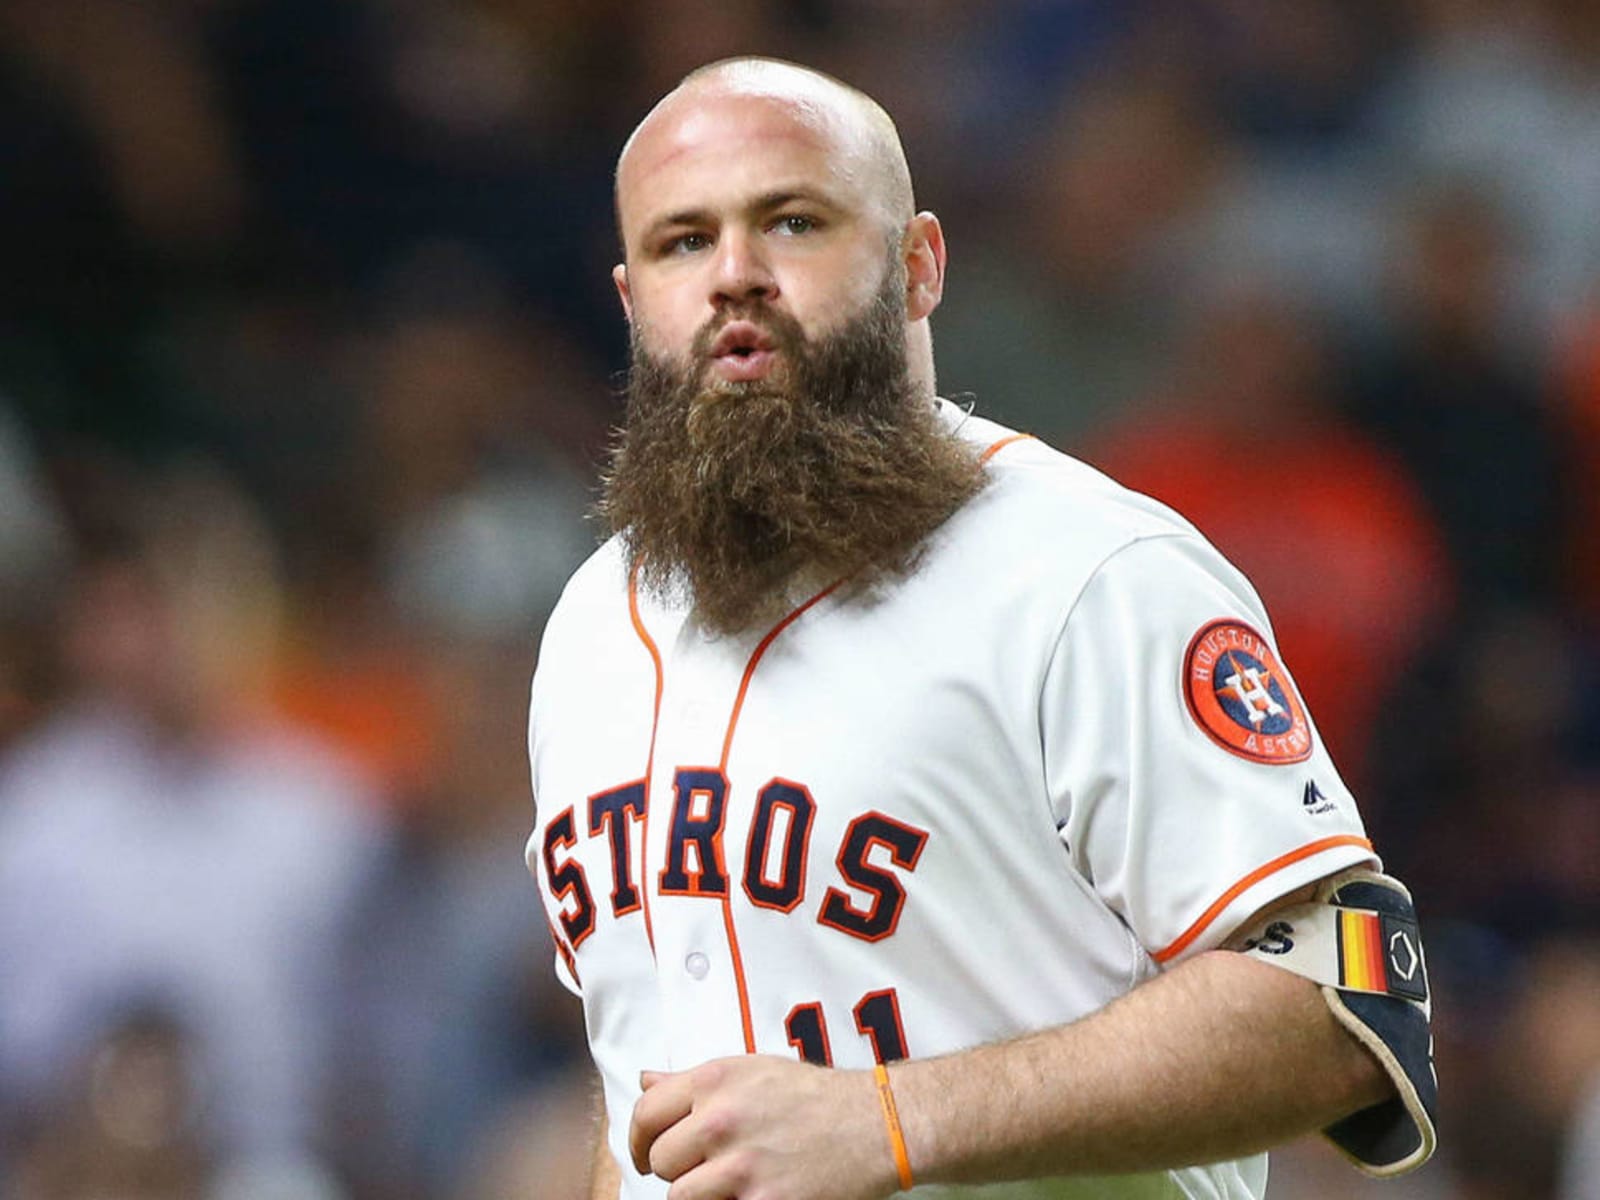 Former Astros slugger Evan Gattis confirms he is 'done playing